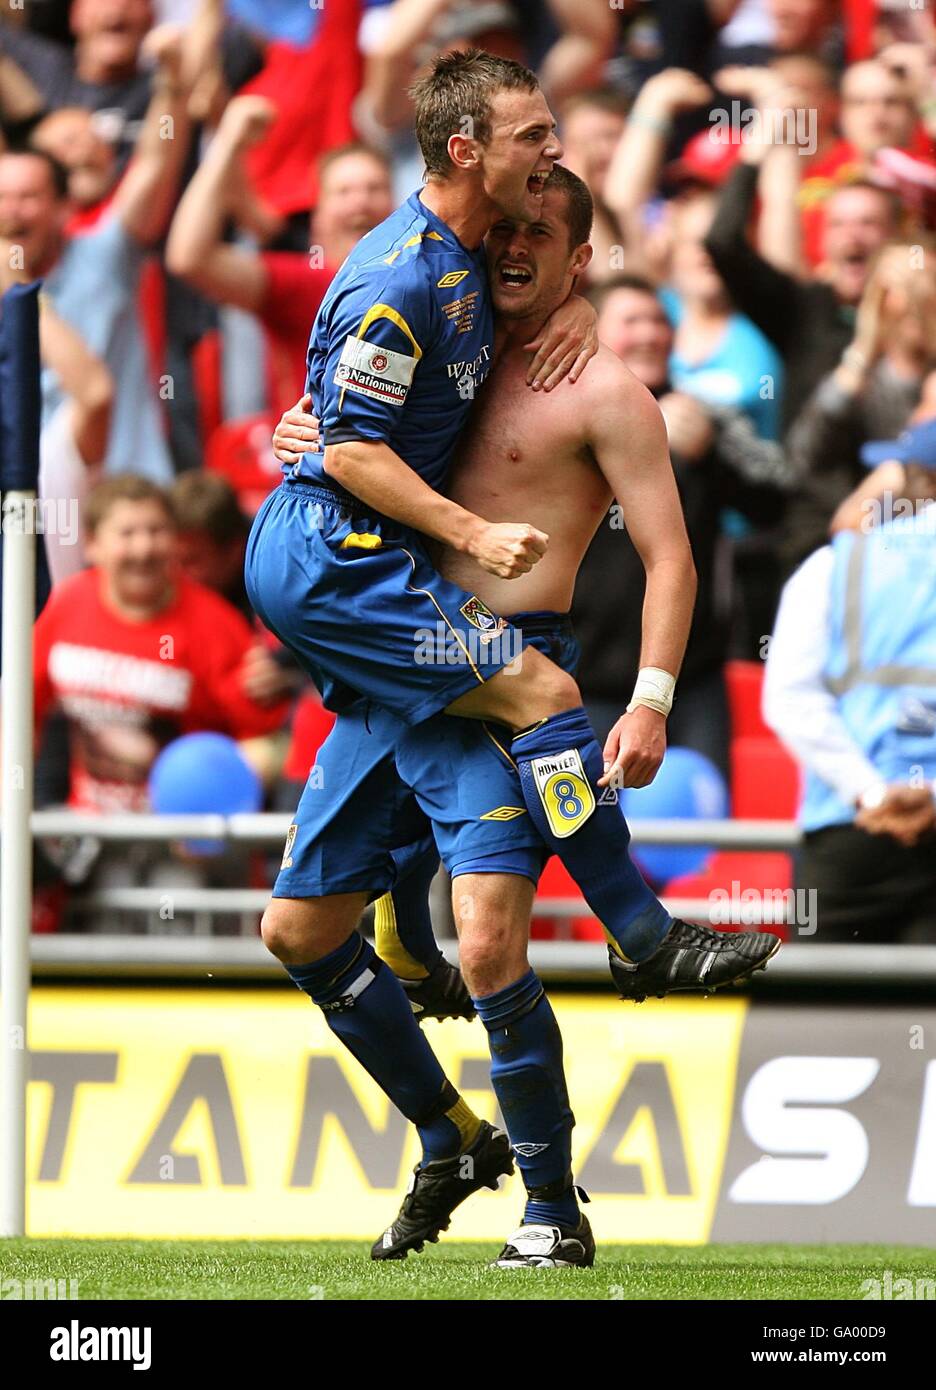 Soccer - Nationwide Conference - Play Off Final - Exeter City v Morecambe - Wembley Stadium. Morecambe's Danny Carlton (right) celebrates after scoring the third goal of the game, with team mate Gary Hunter. Stock Photo